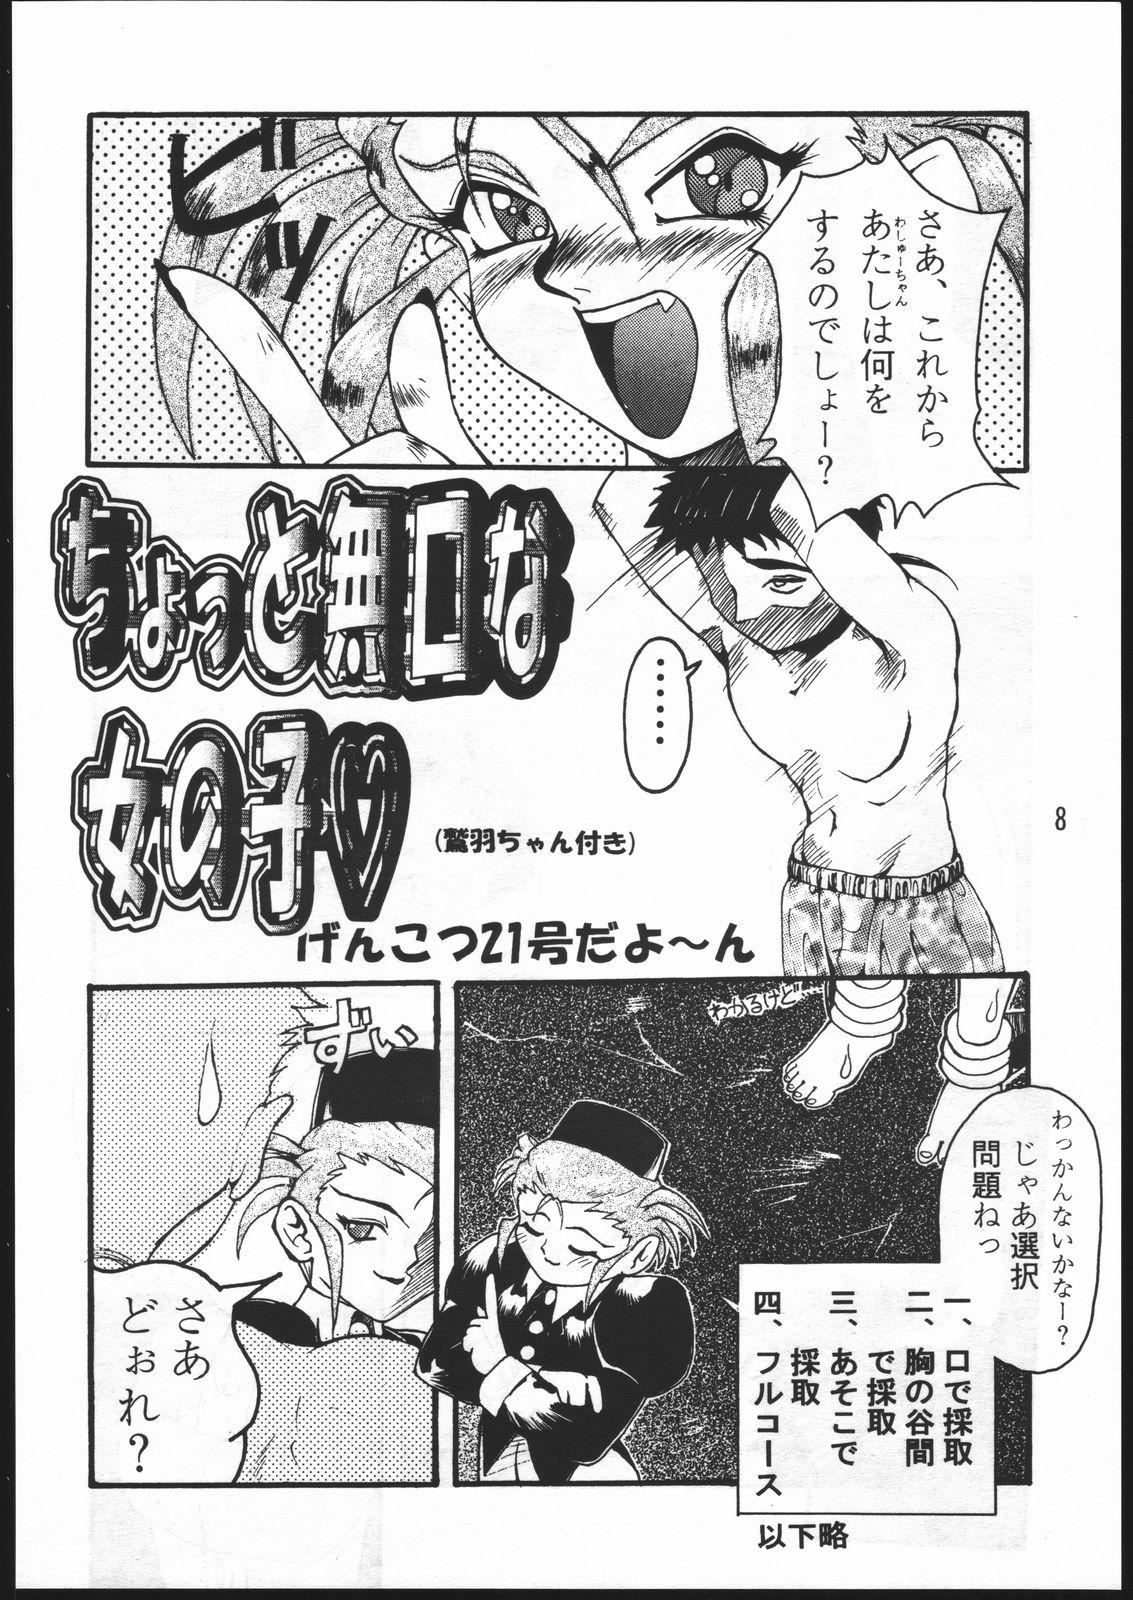 Femboy CD SONG BOOK - Tenchi muyo Red Head - Page 7